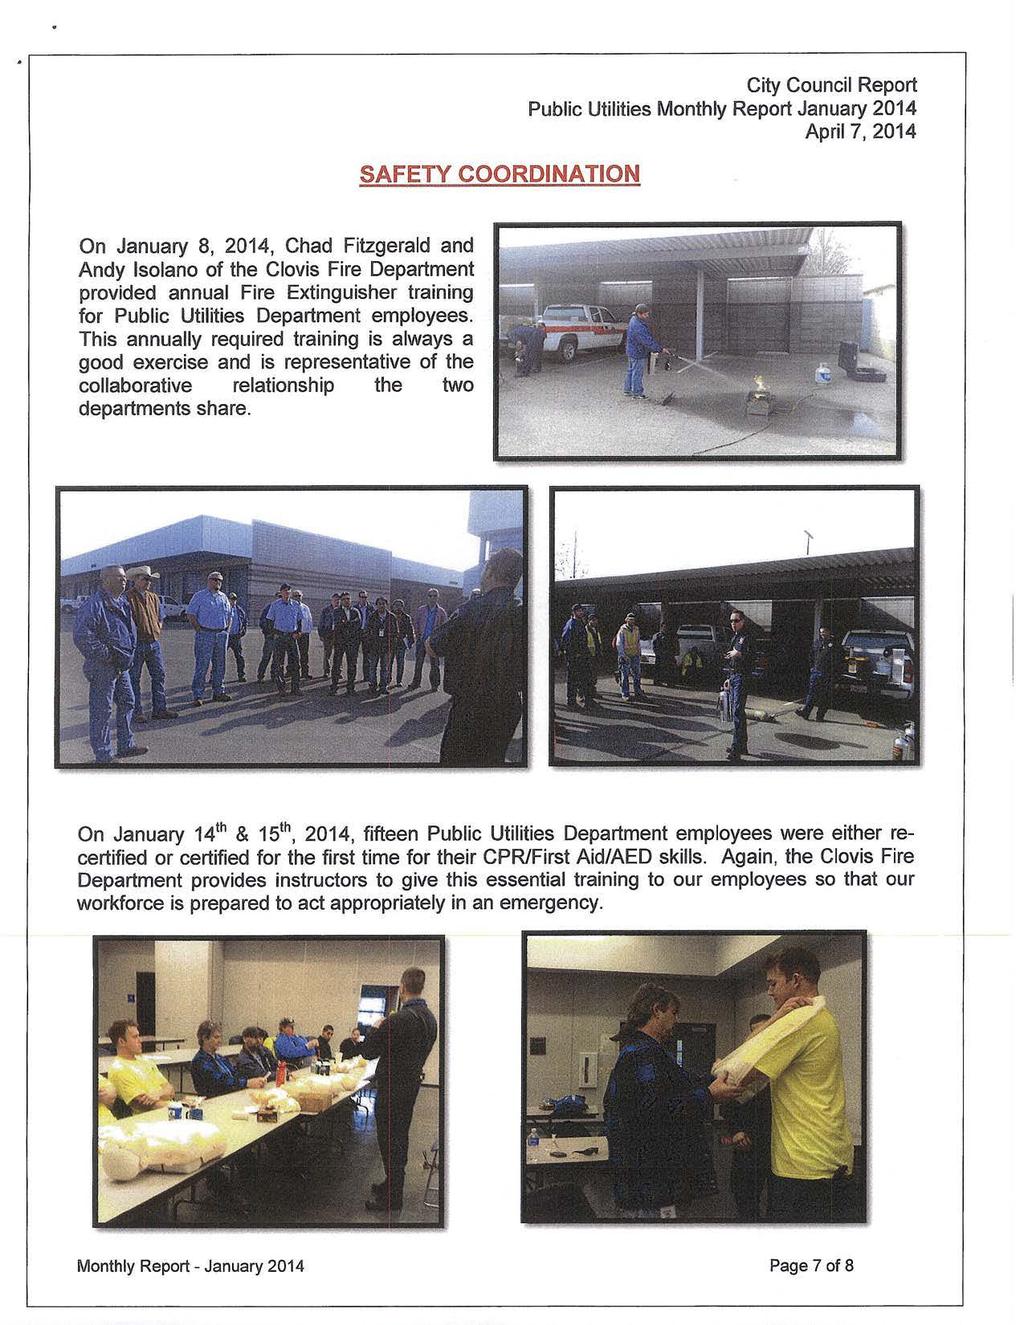 SAFETY COORDINATION City Council Report On January 8, 2014, Chad Fitzgerald and Andy lsolano of the Clovis Fire Department provided annual Fire Extinguisher training for Public Utilities Department